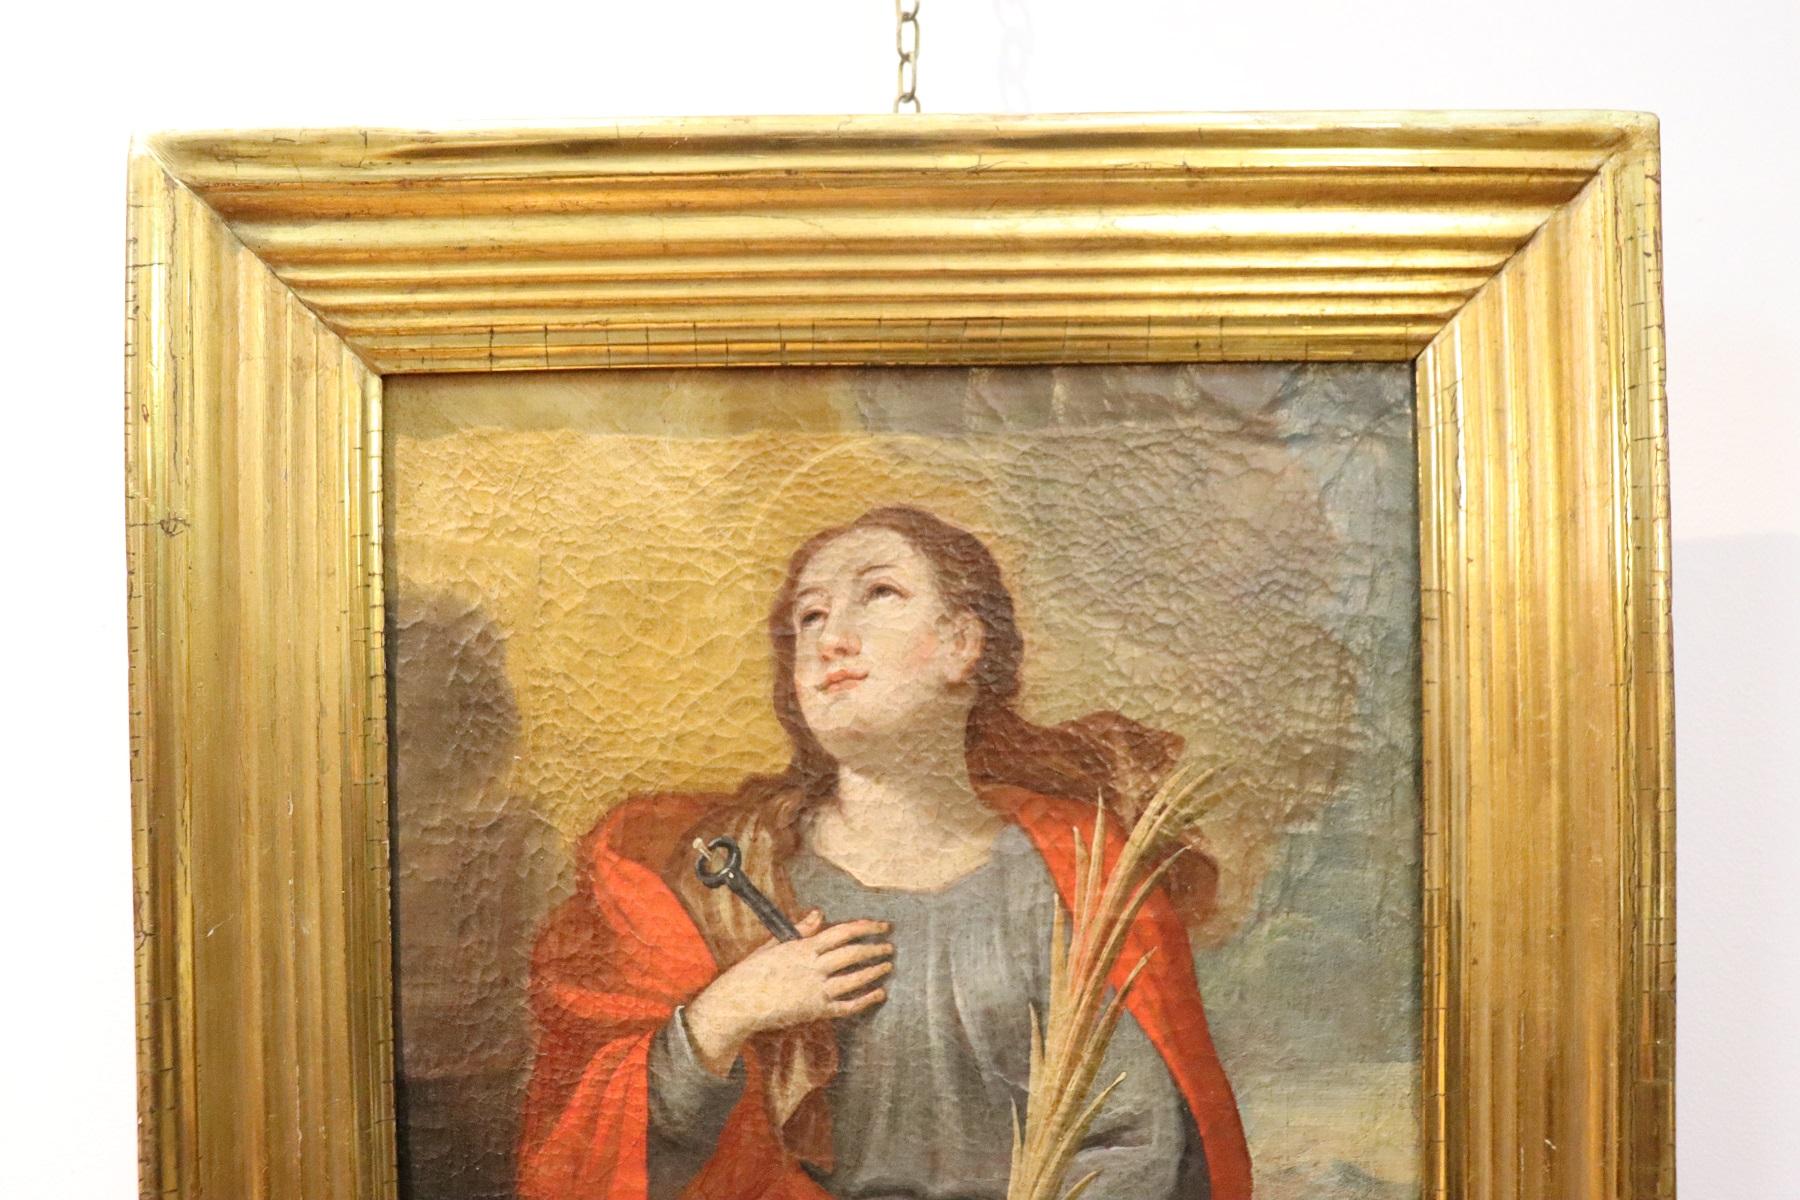 Refined oil painting on canvas from an important collection of Italian antique paintings about 1750s. Religious subject saint Apollonia depicted with the classical objects of iconography. Apollonia was a Christian martyr, venerated by the Catholic